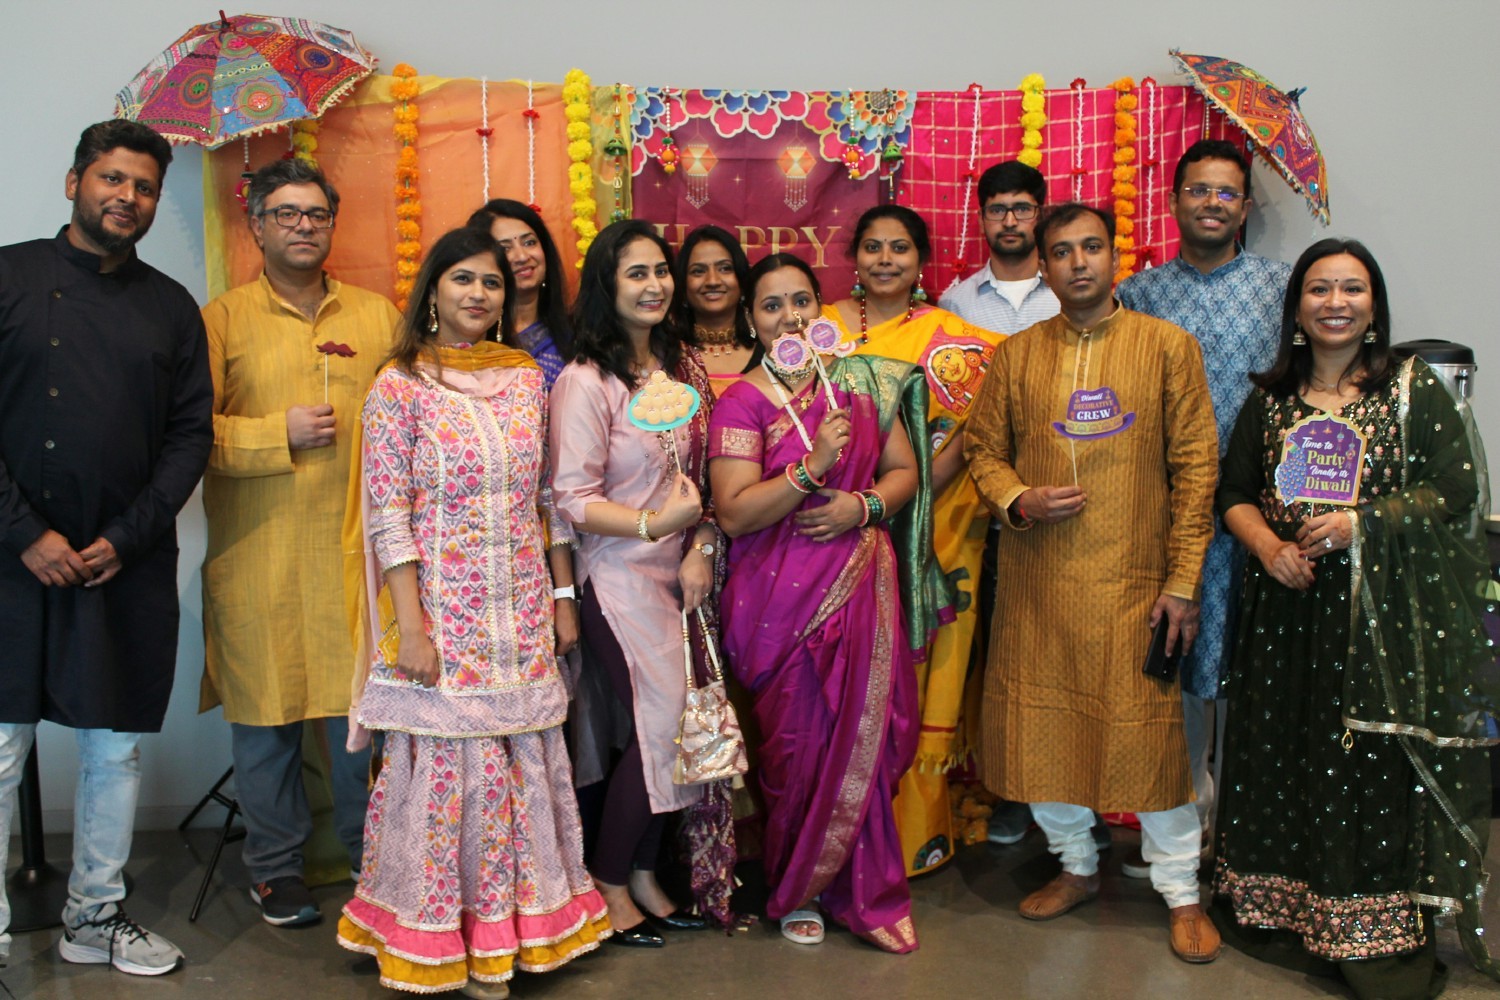 Our newest ERG, Indian Descendant Employees & Allies (IDEA) brought Diwali to Asurion!